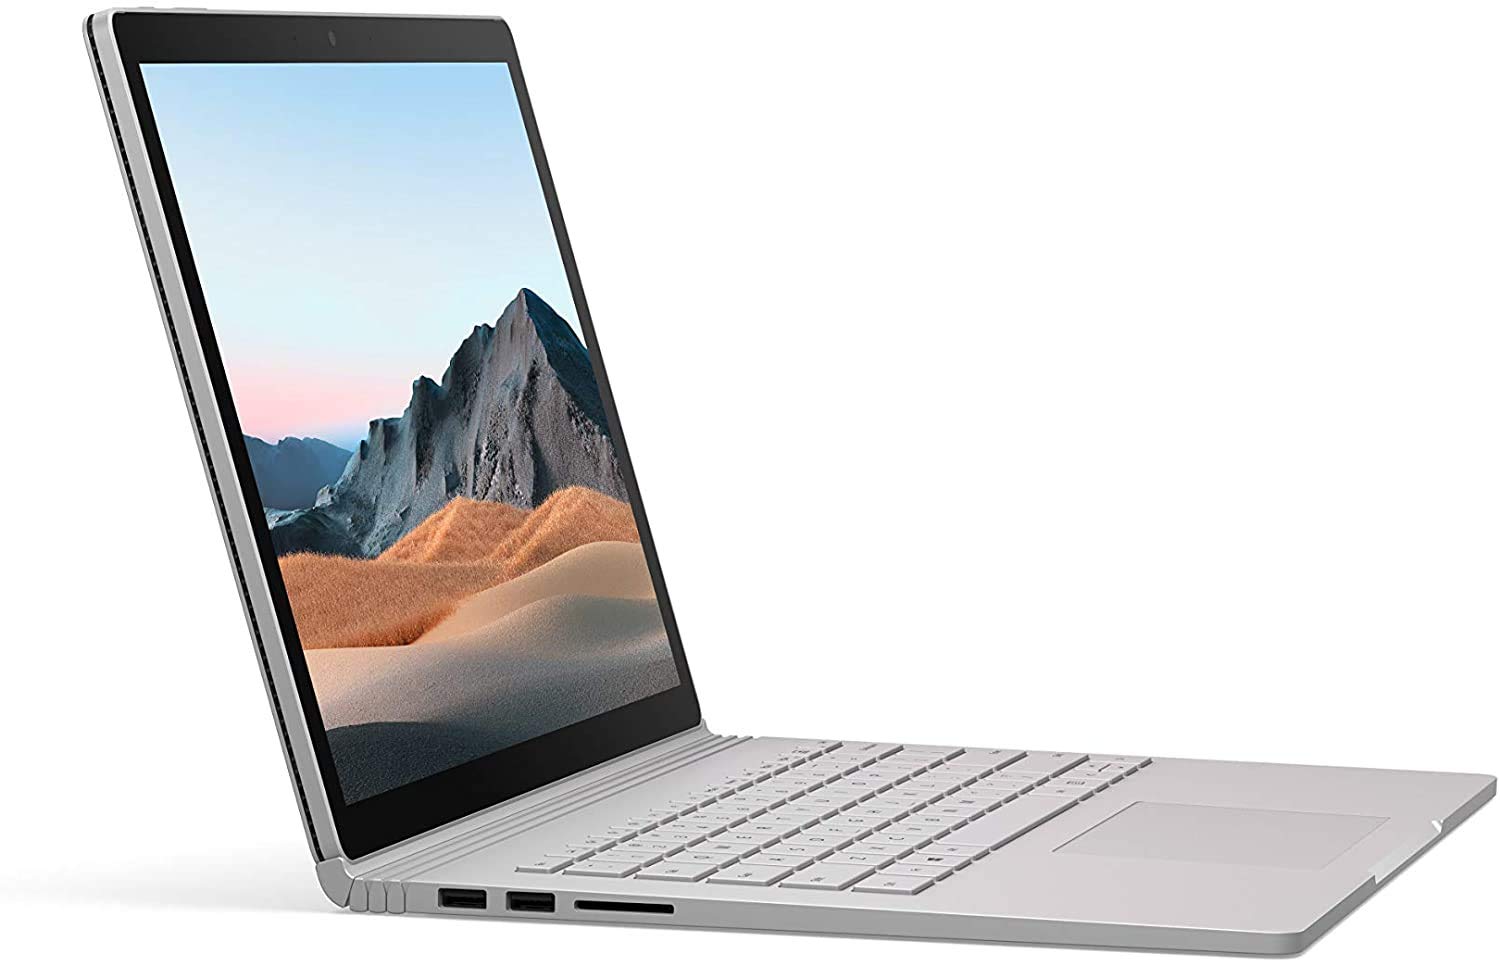 Microsoft Surface Book 3 13.5 Inch Touch-Screen 512GB i7 32GB RAM with Windows 10 Pro (Wi-Fi, 1.3GHz Quad-Core i7 up to 3.9GHz, Newest Version) SLM-00001